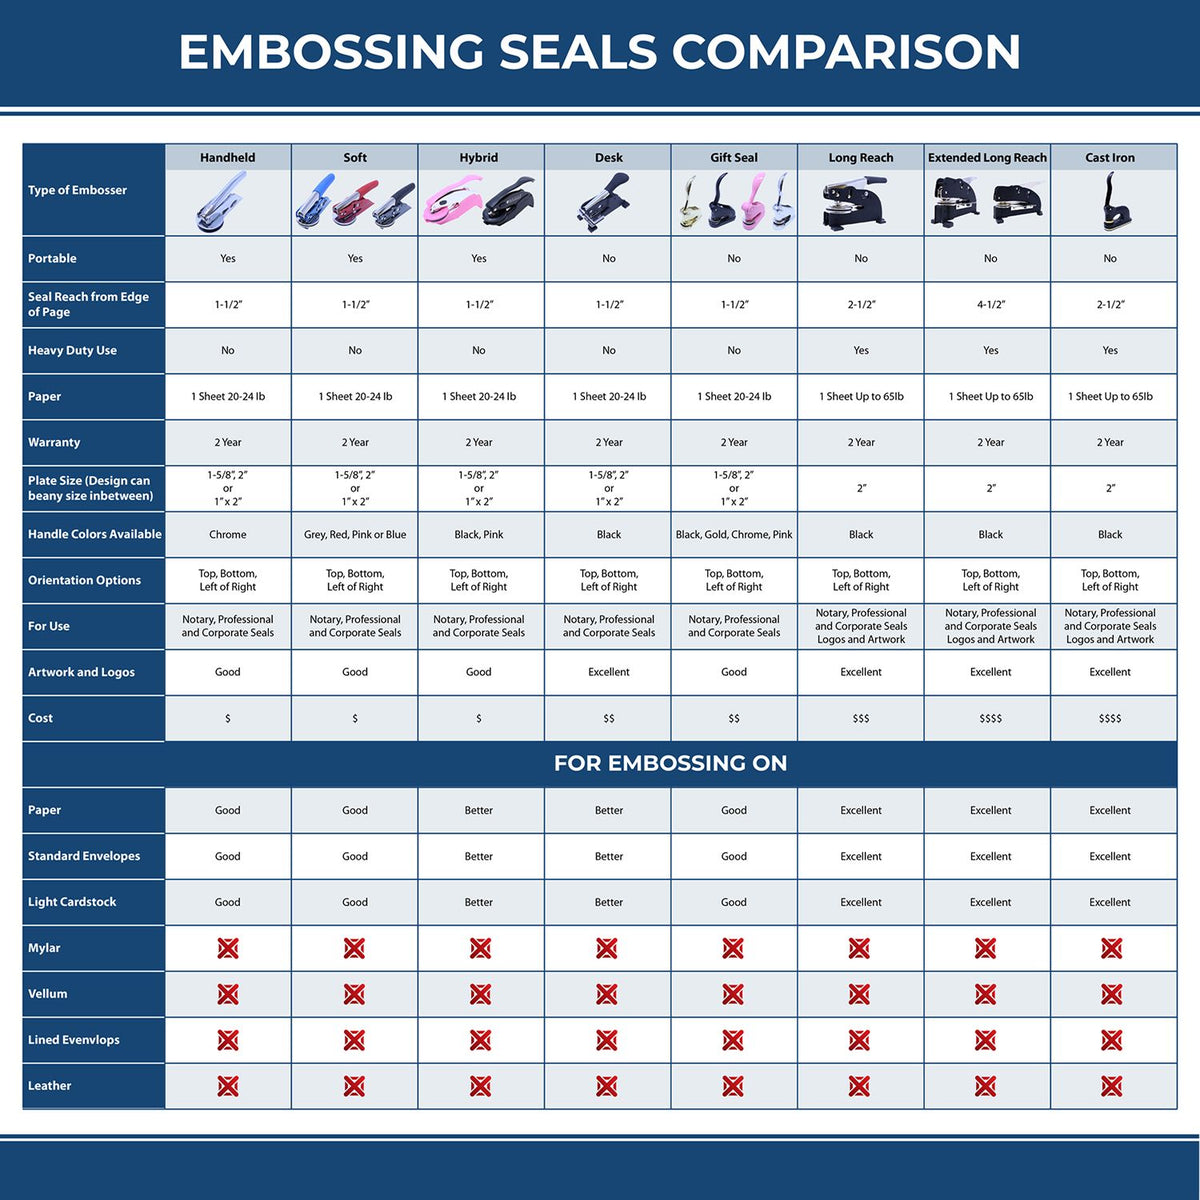 A comparison chart for the different types of mount models available for the Heavy Duty Cast Iron District of Columbia Engineer Seal Embosser.